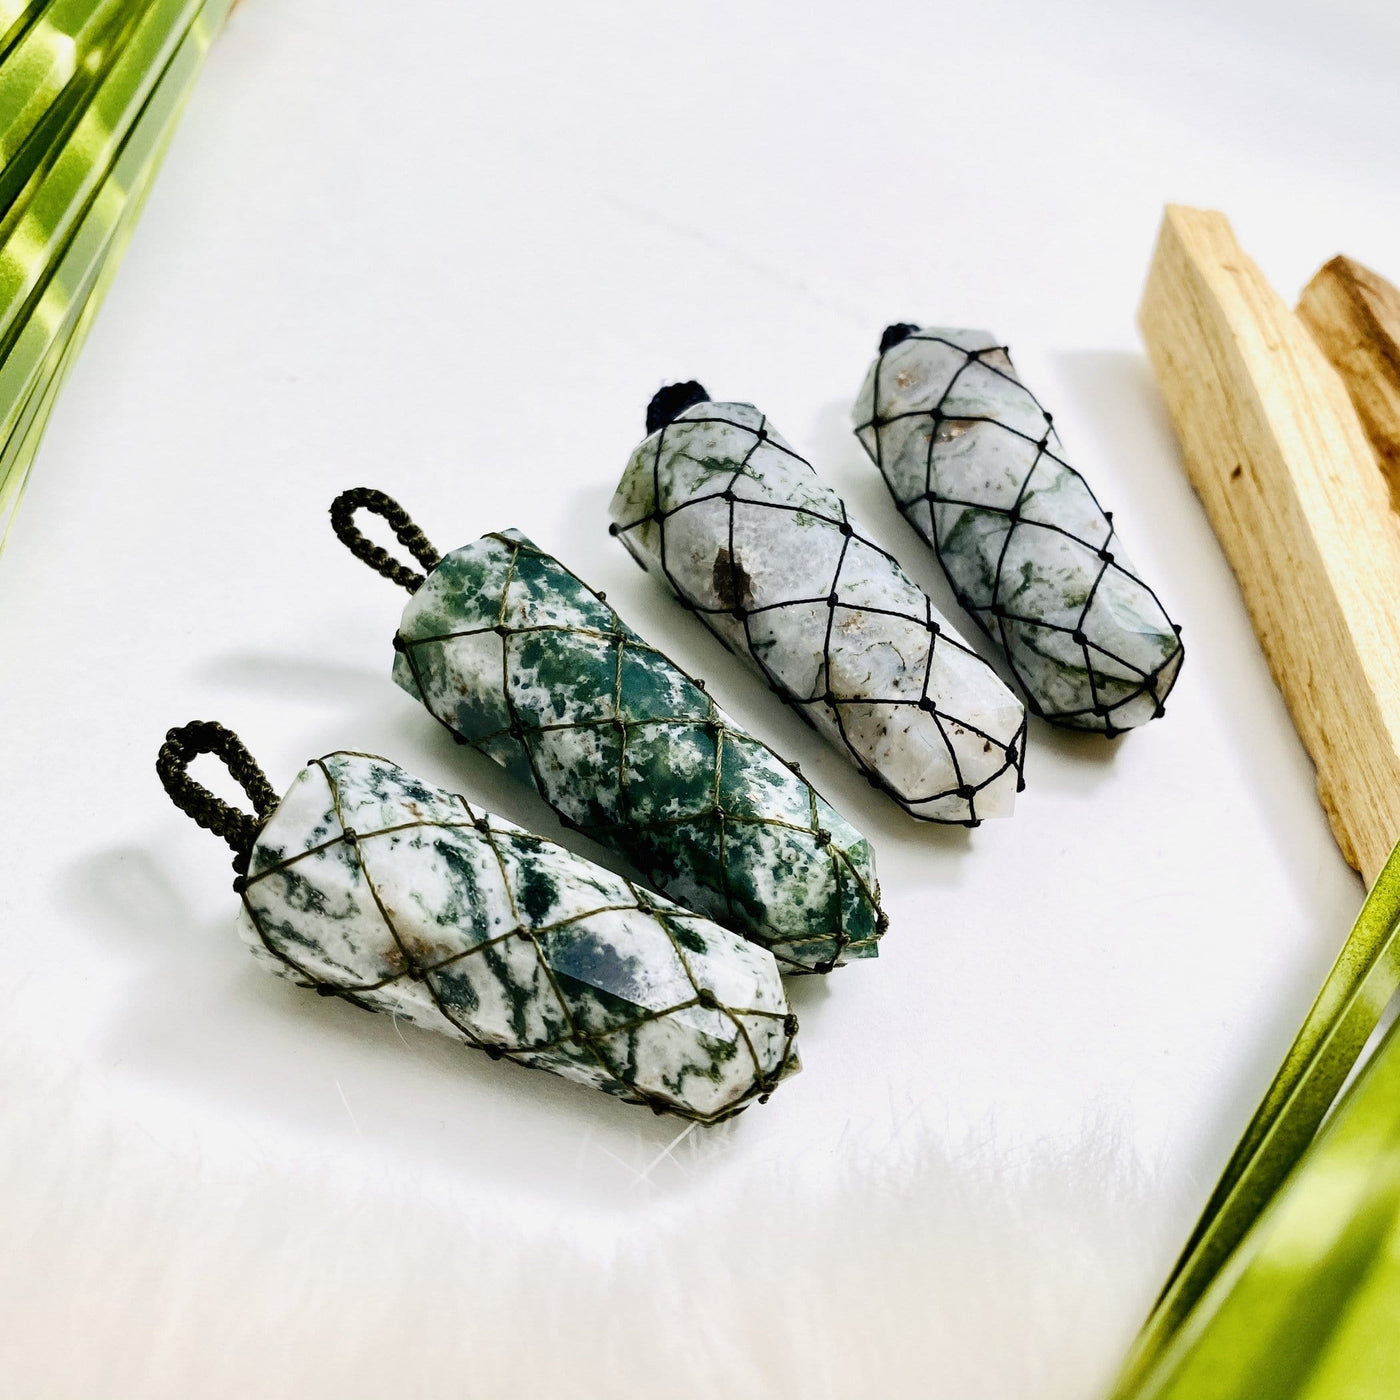 4 moss agate netted pendants with decorations in the background